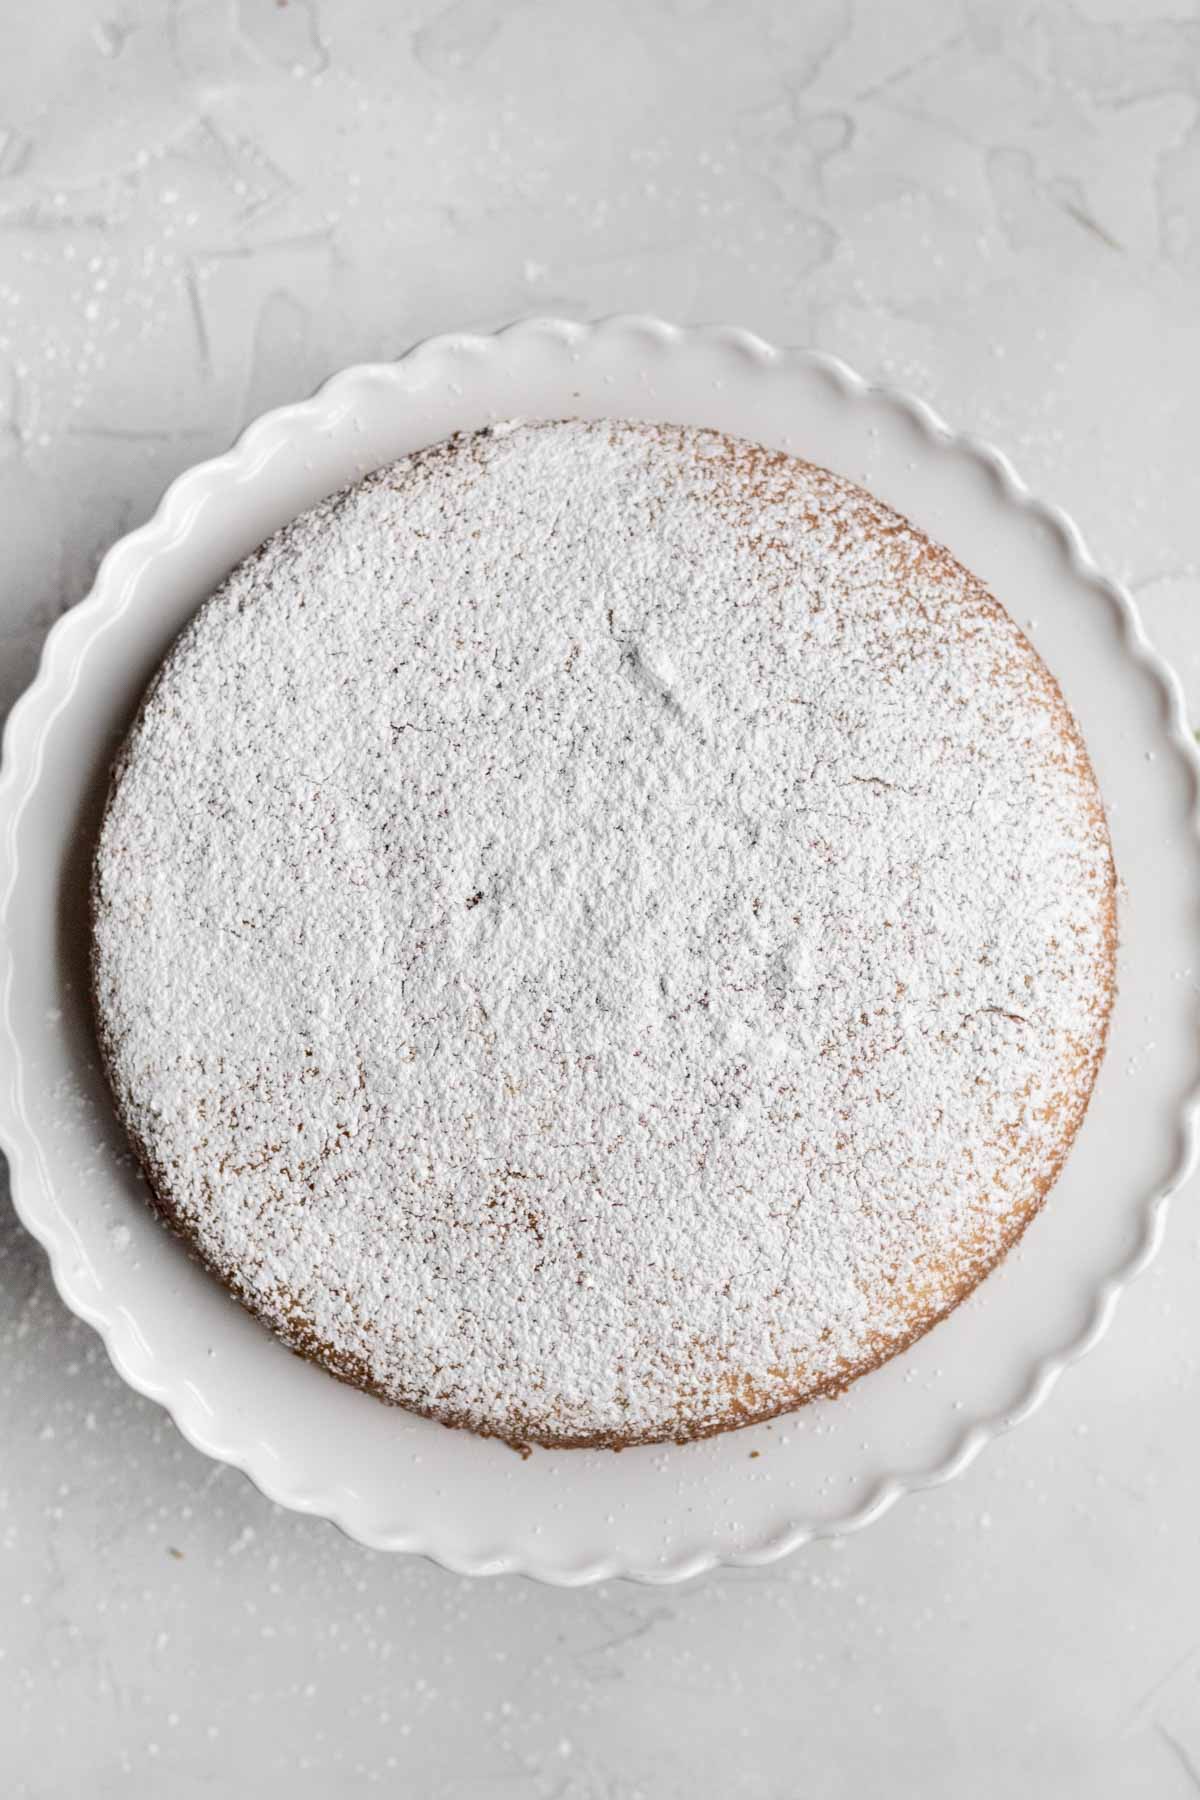 A light coat of confectioners' sugar is added to the top of the cake.